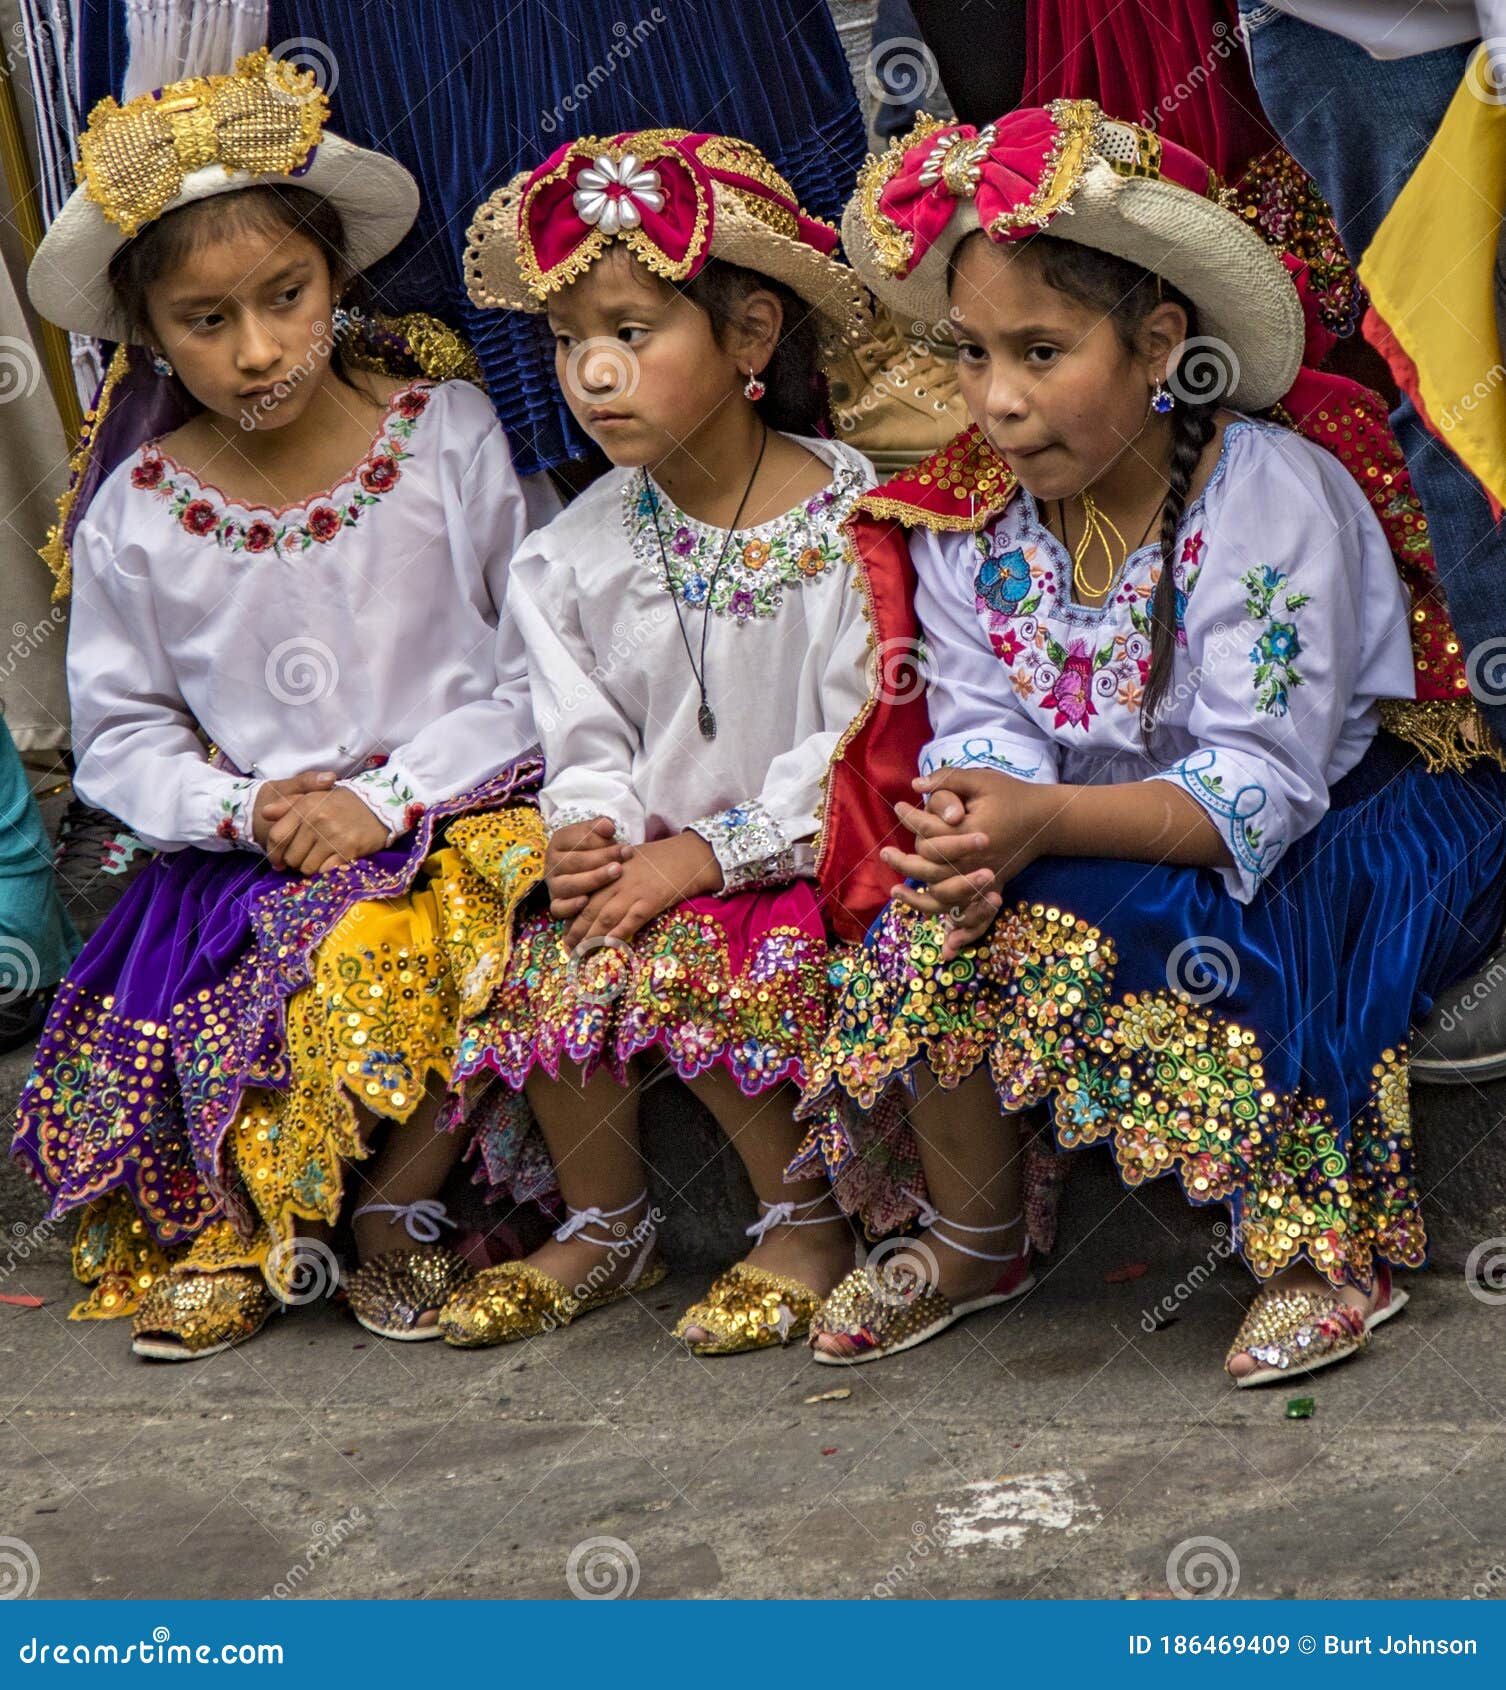 Collection 101+ Images what is the traditional clothing in ecuador Full HD, 2k, 4k